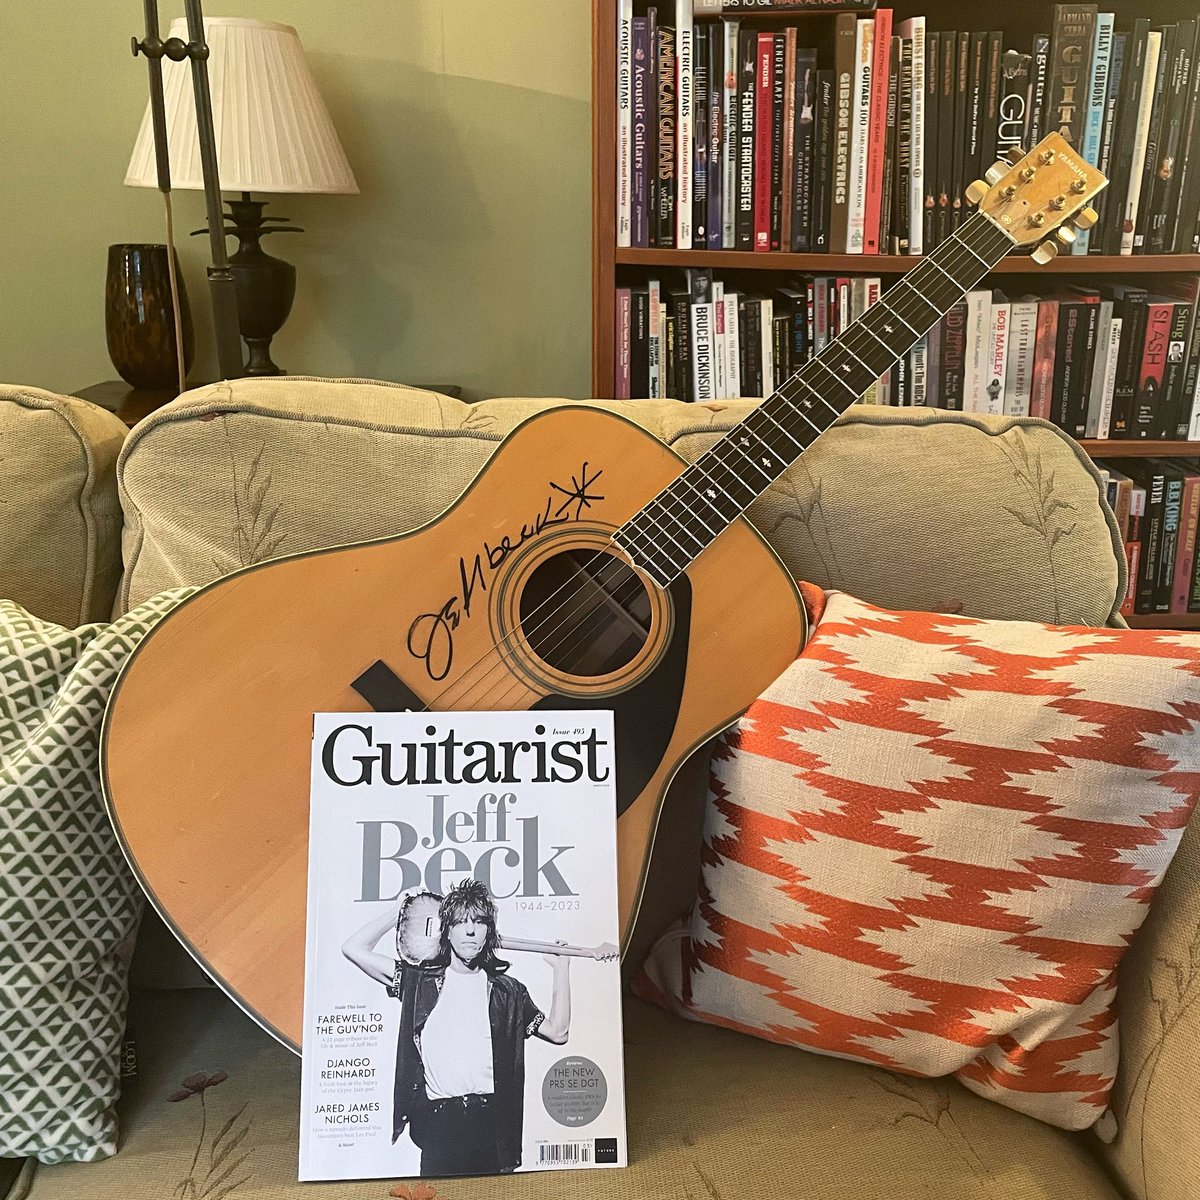 Proud to have been interviewed about the Great Man for this @Guitarist_Mag special edition. There are some superbly written pieces about Jeff throughout the magazine. This guitar was signed by him 20 yrs ago at Jimmy Copley’s birthday party. One of my treasured possessions. 🎸❤️